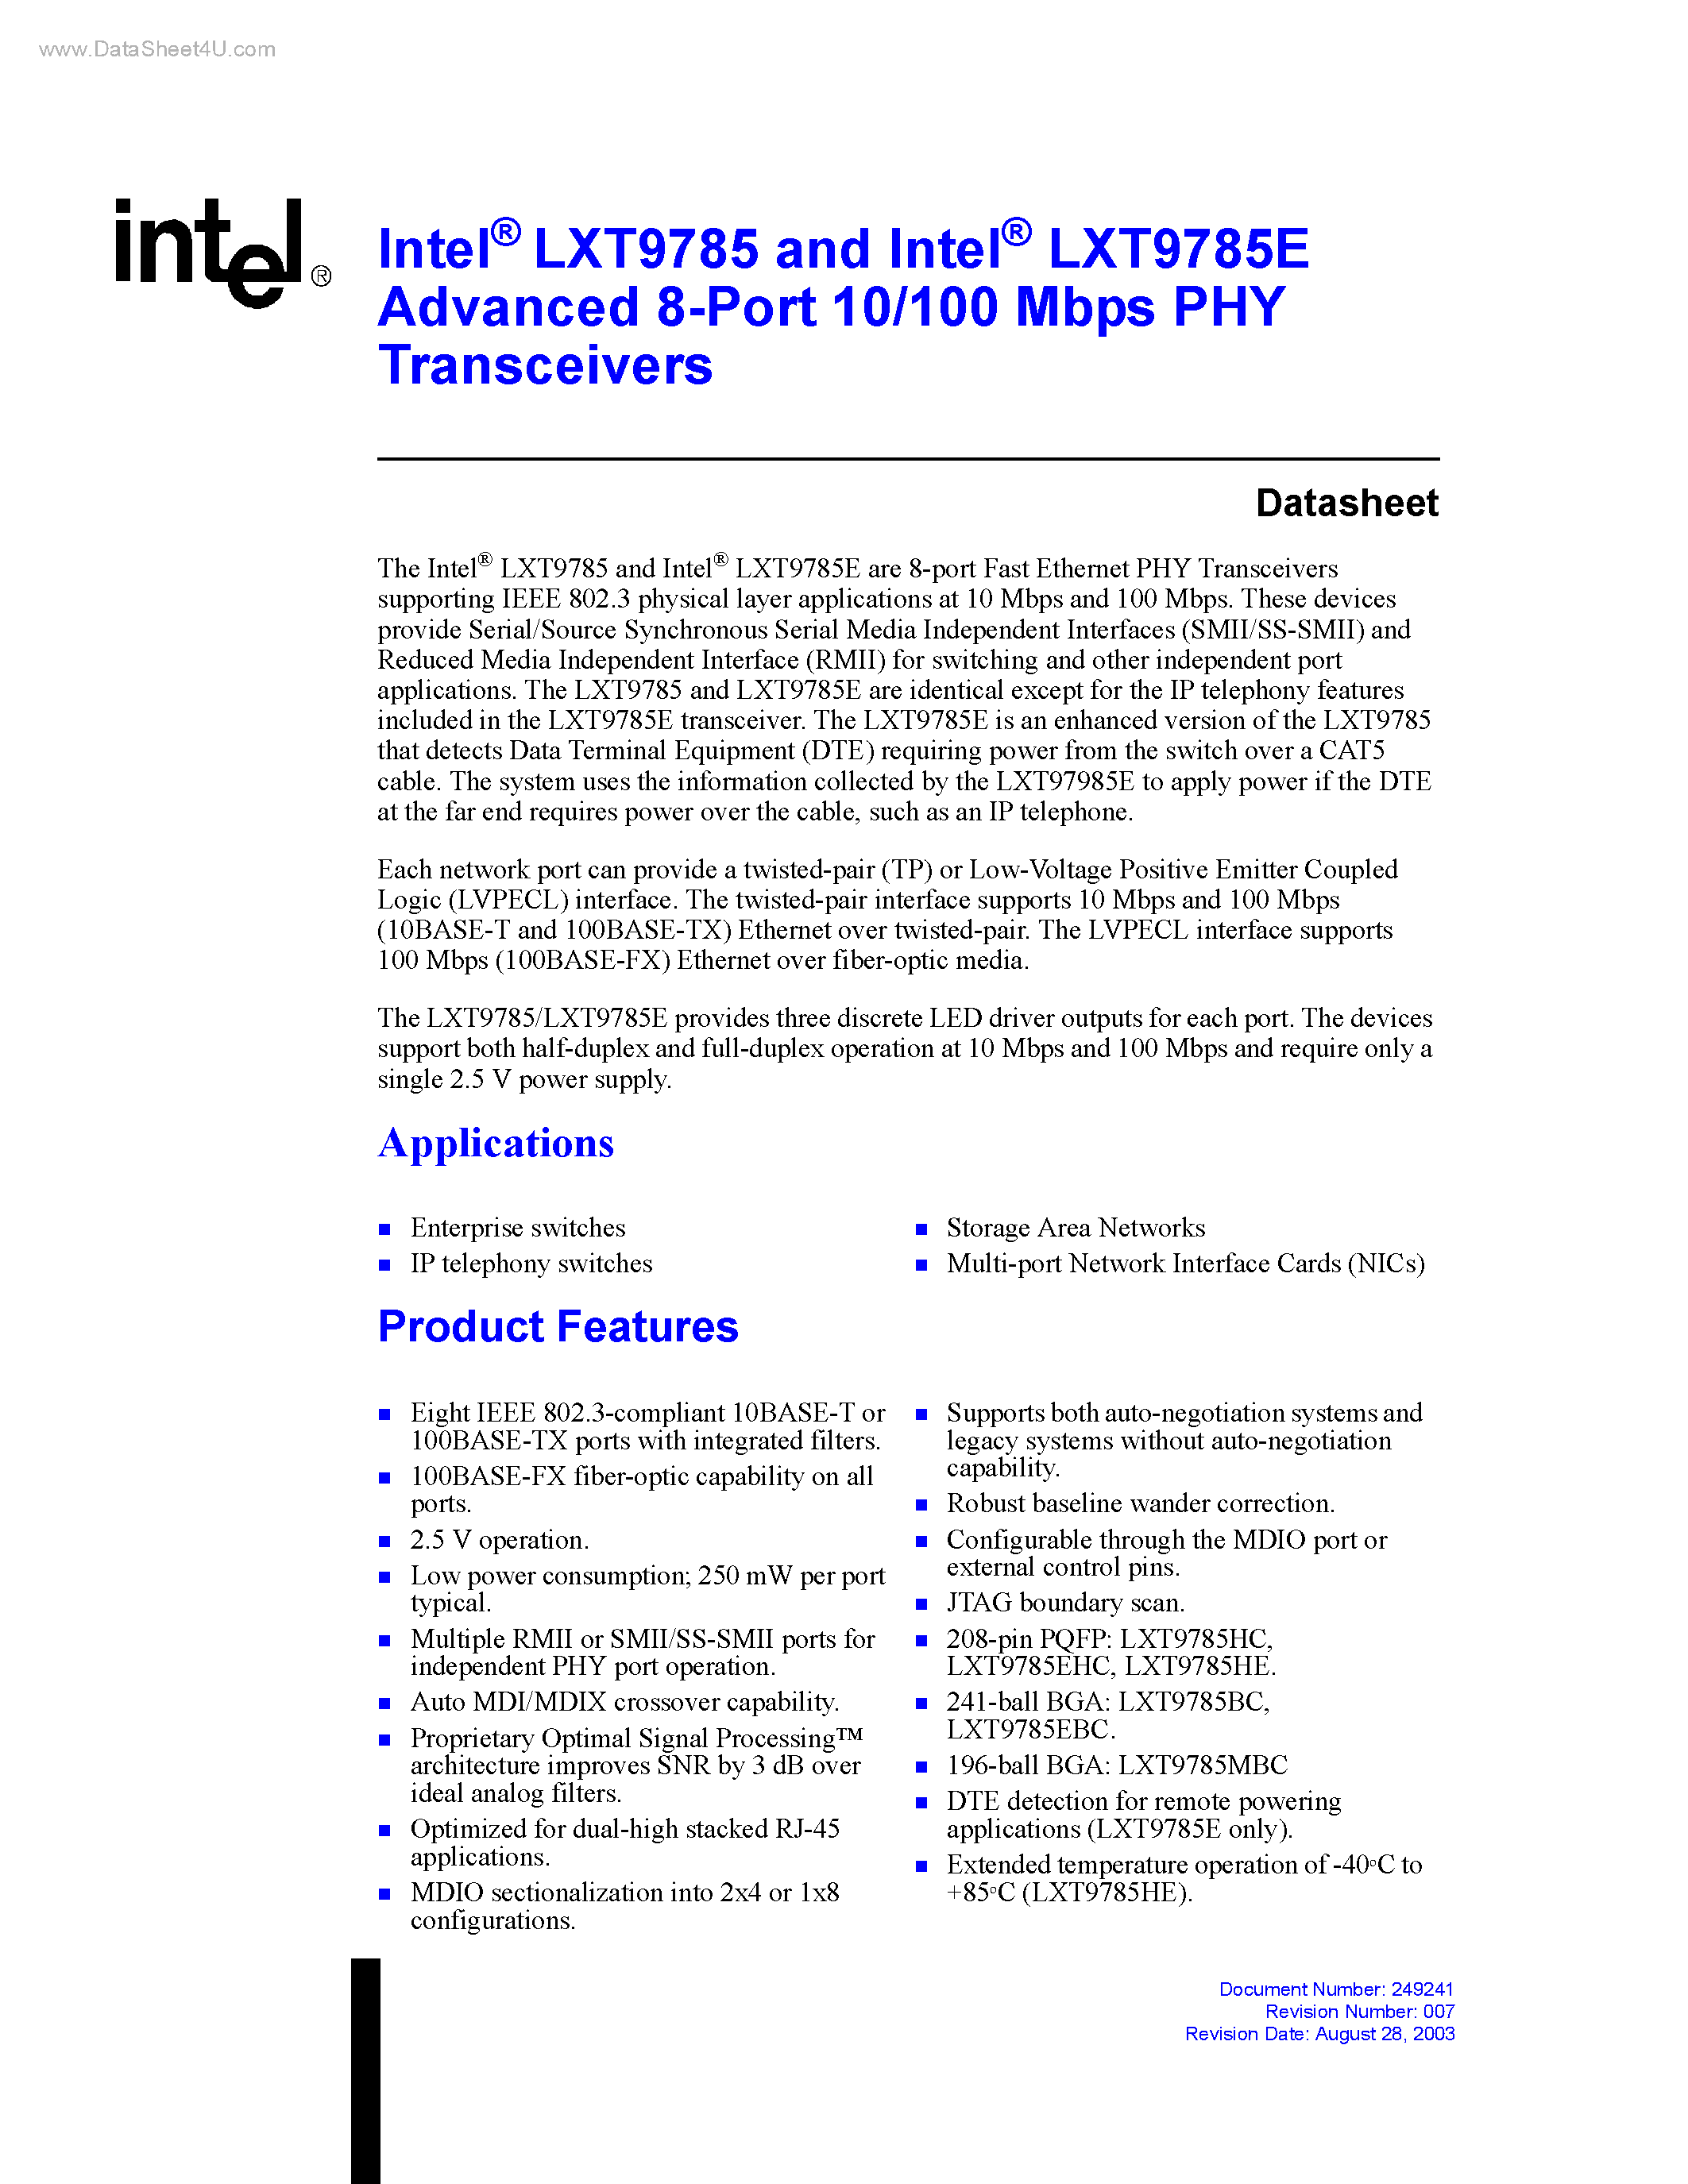 Datasheet LXT9785 - Advanced 8-Port 10/100 Mbps PHY Transceivers page 1